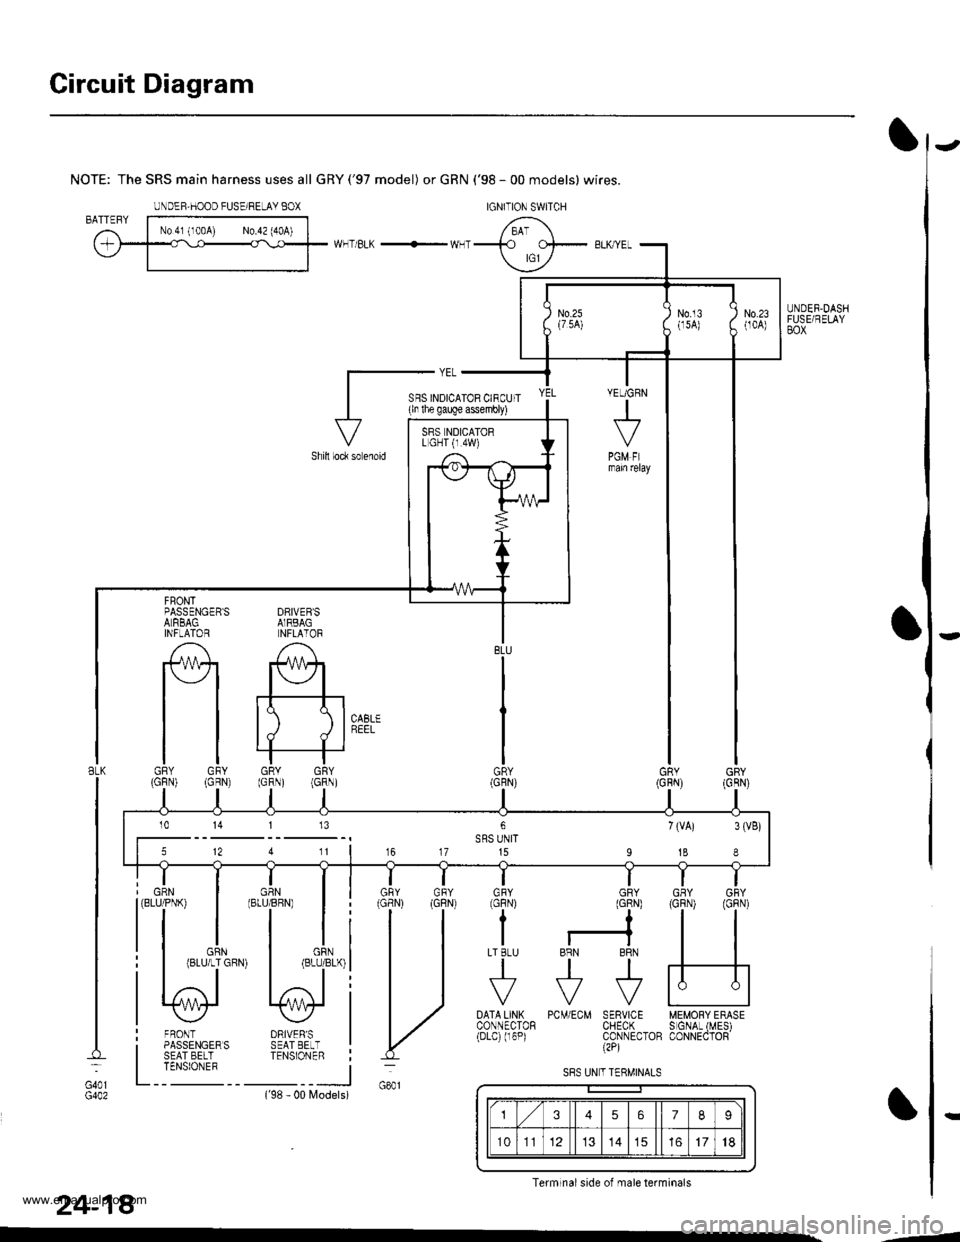 HONDA CR-V 1997 RD1-RD3 / 1.G Workshop Manual 
Circuit Diagram
UNDER.DASHFUSE/RELAYBOX
NOTE: The SRS main harness uses all GRY(97 model) or GRN (98 - 00 models) wires.
WHT/BLK -- WHT
DRIVEBSAIRBAGNFLATOR
A
#+
tt tll./ d I
GRY GRY(GRN) (GRN)
F